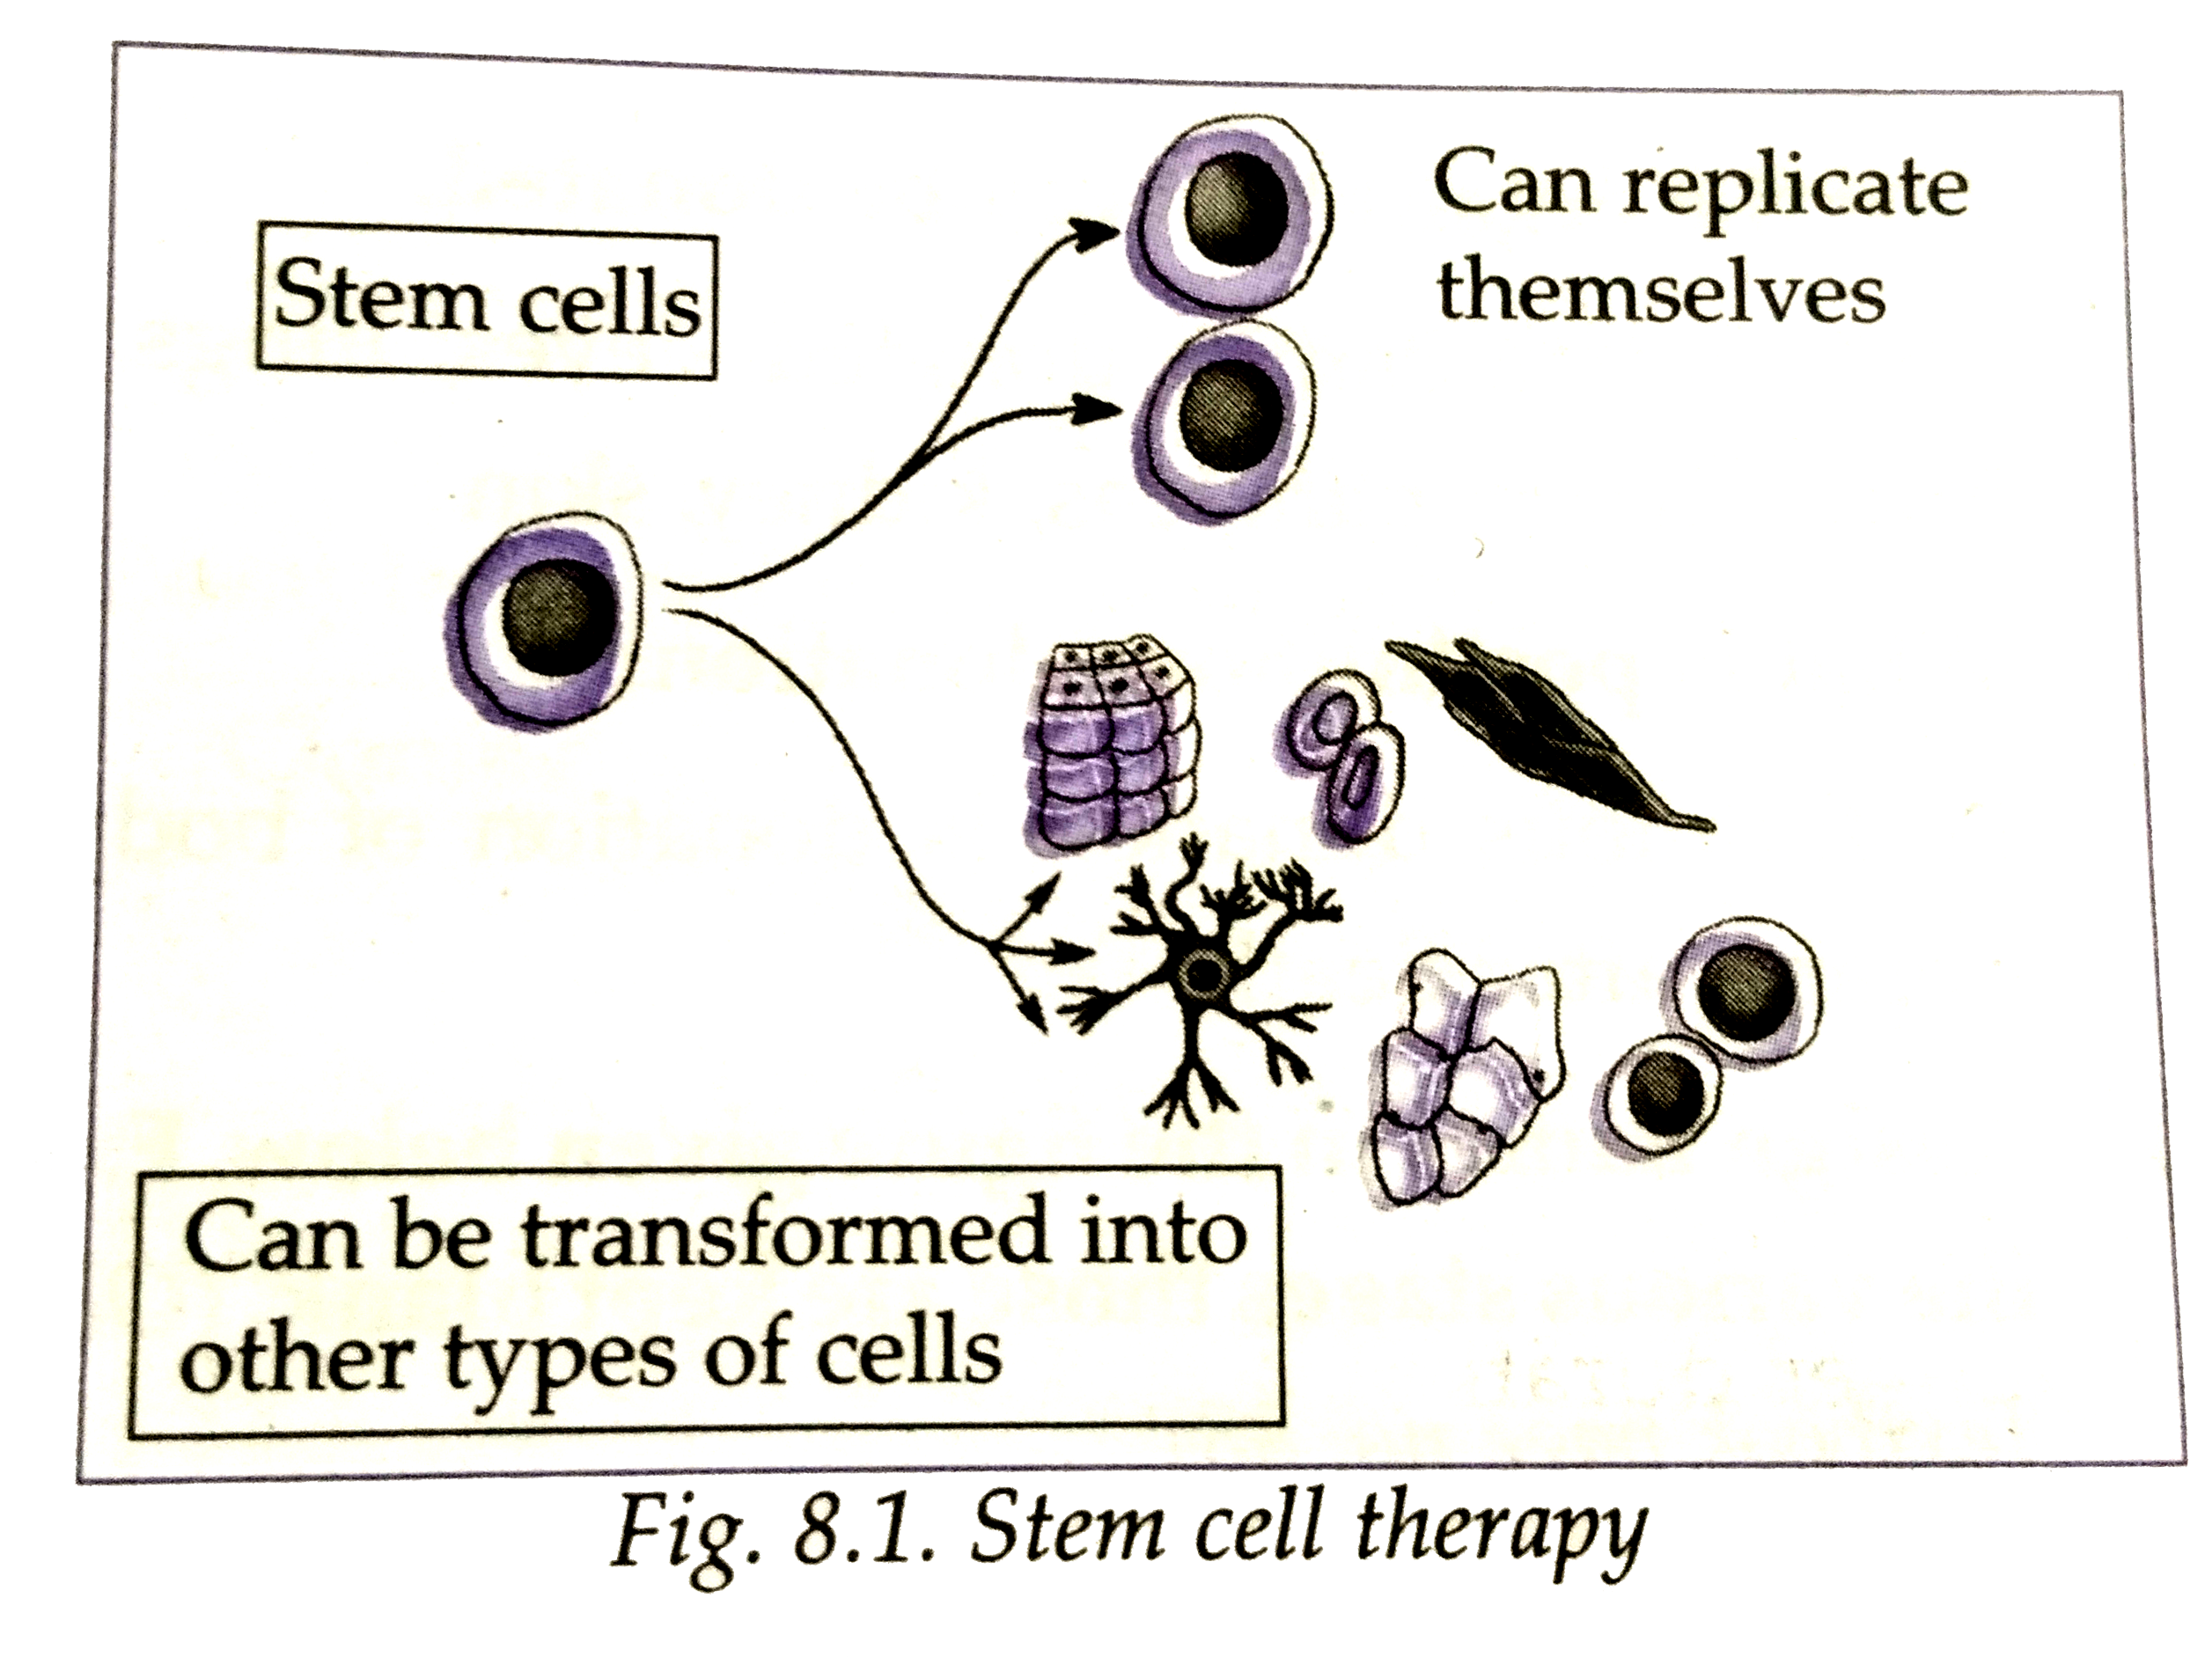 Label the diagram and answer the question      which types of cells are shown in the diagrams?